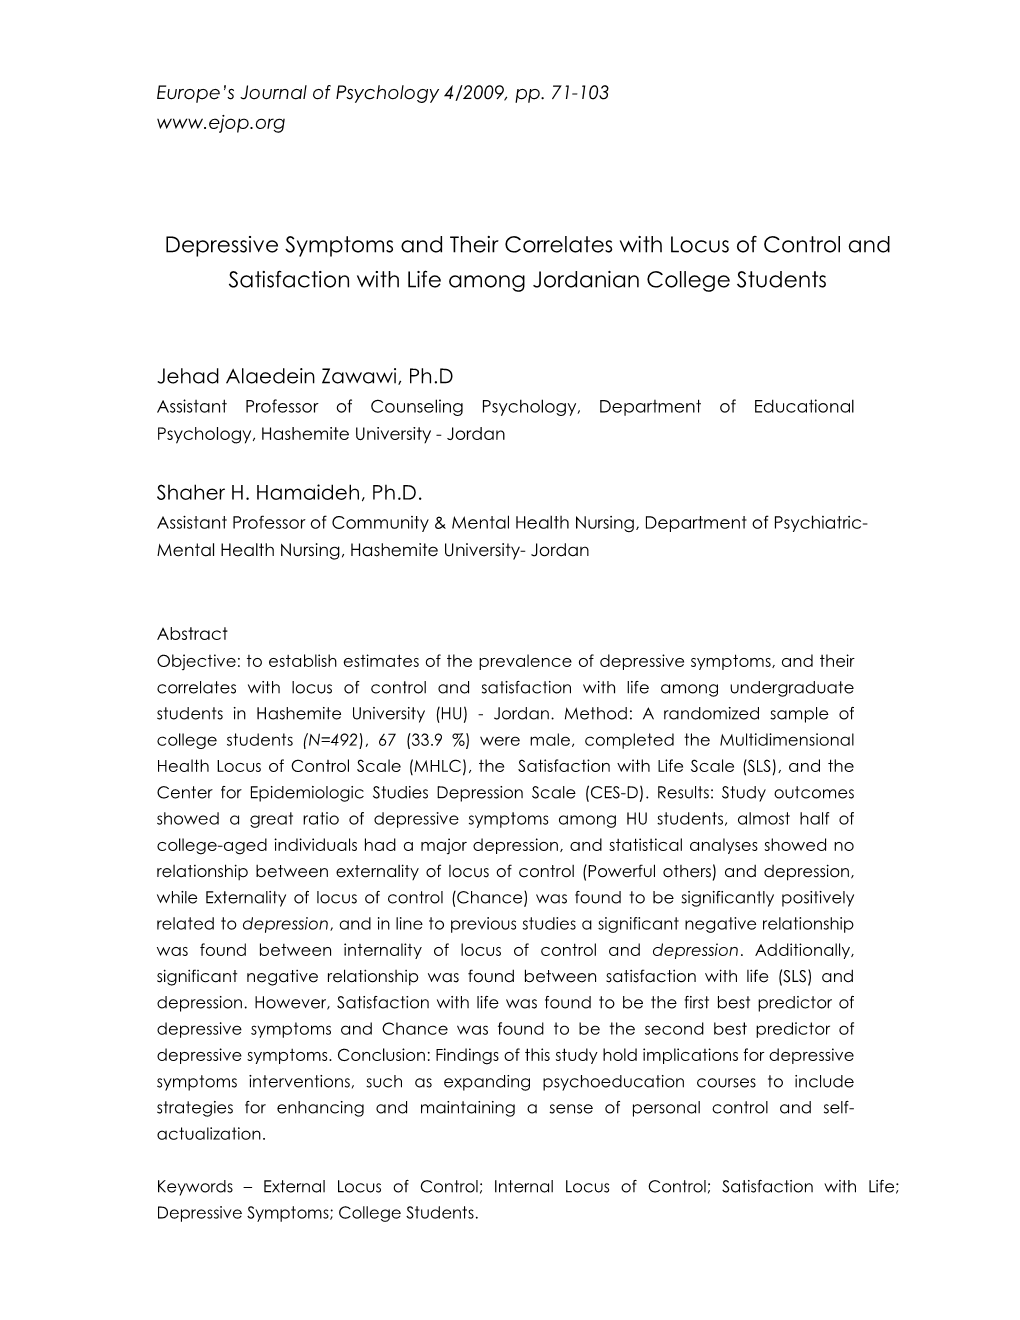 Depressive Symptoms and Their Correlates with Locus of Control and Satisfaction with Life Among Jordanian College Students